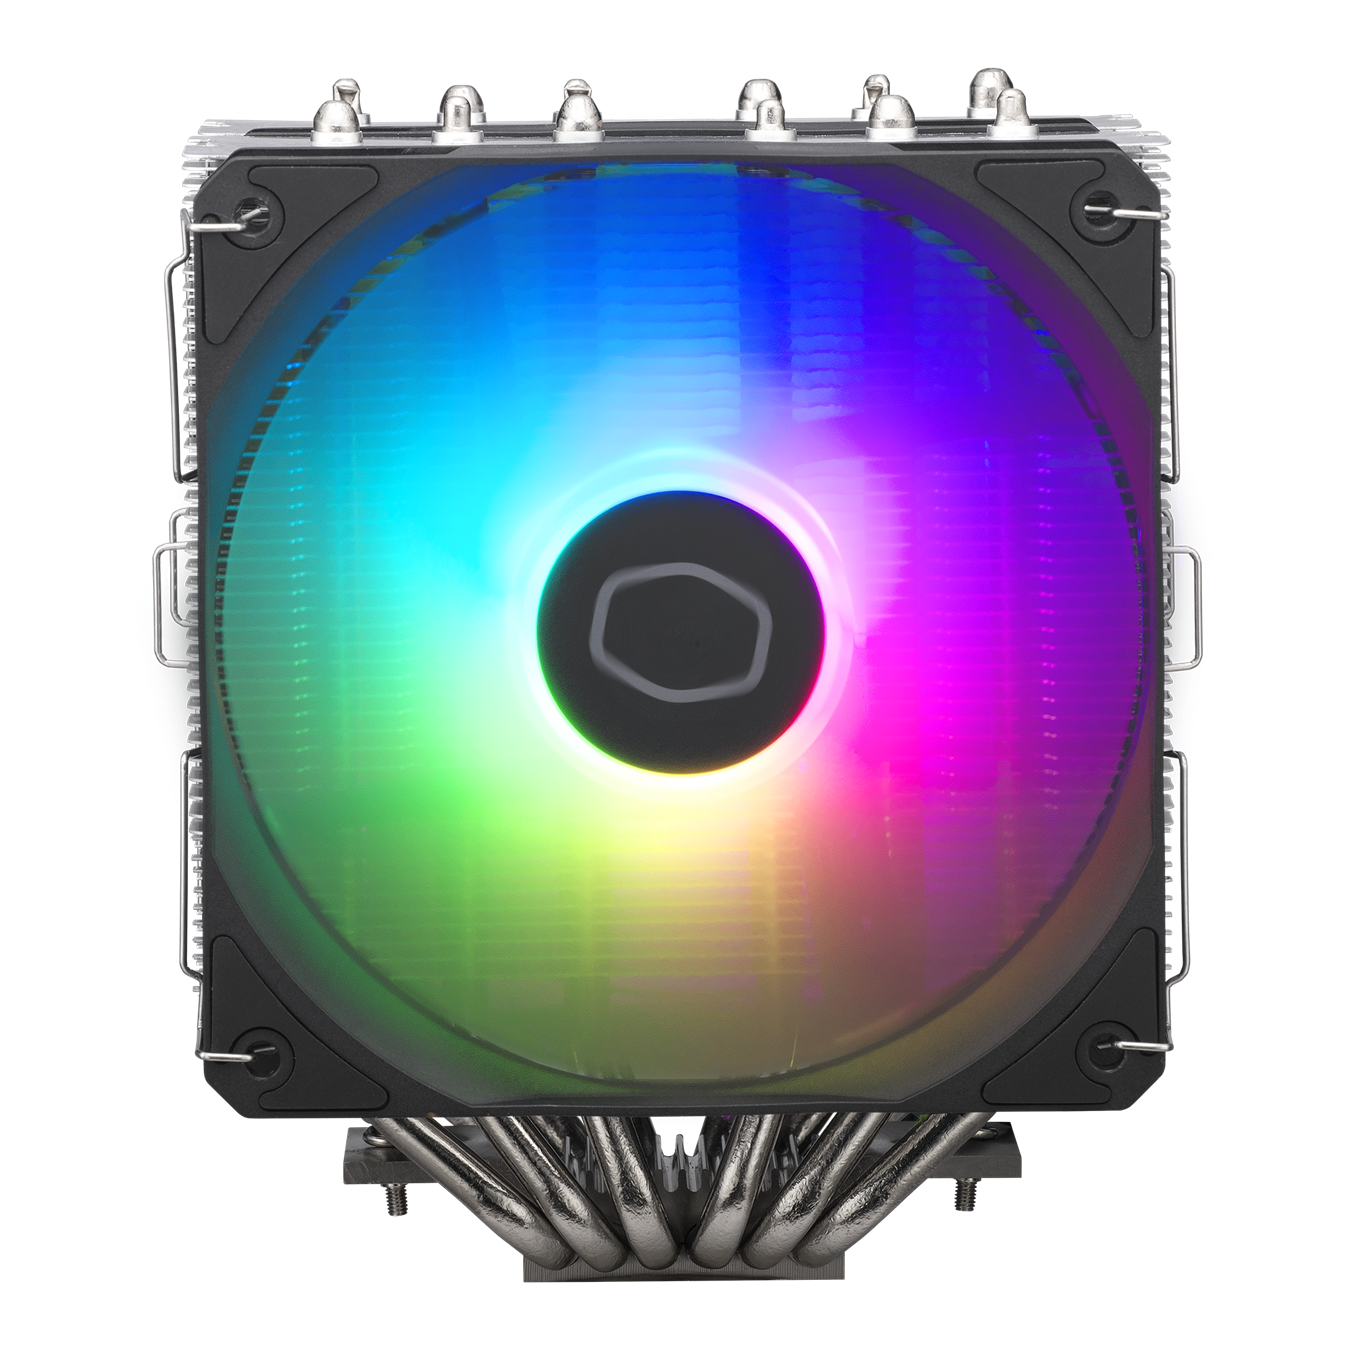 Hyper 620S - Front View with RGB Lighting